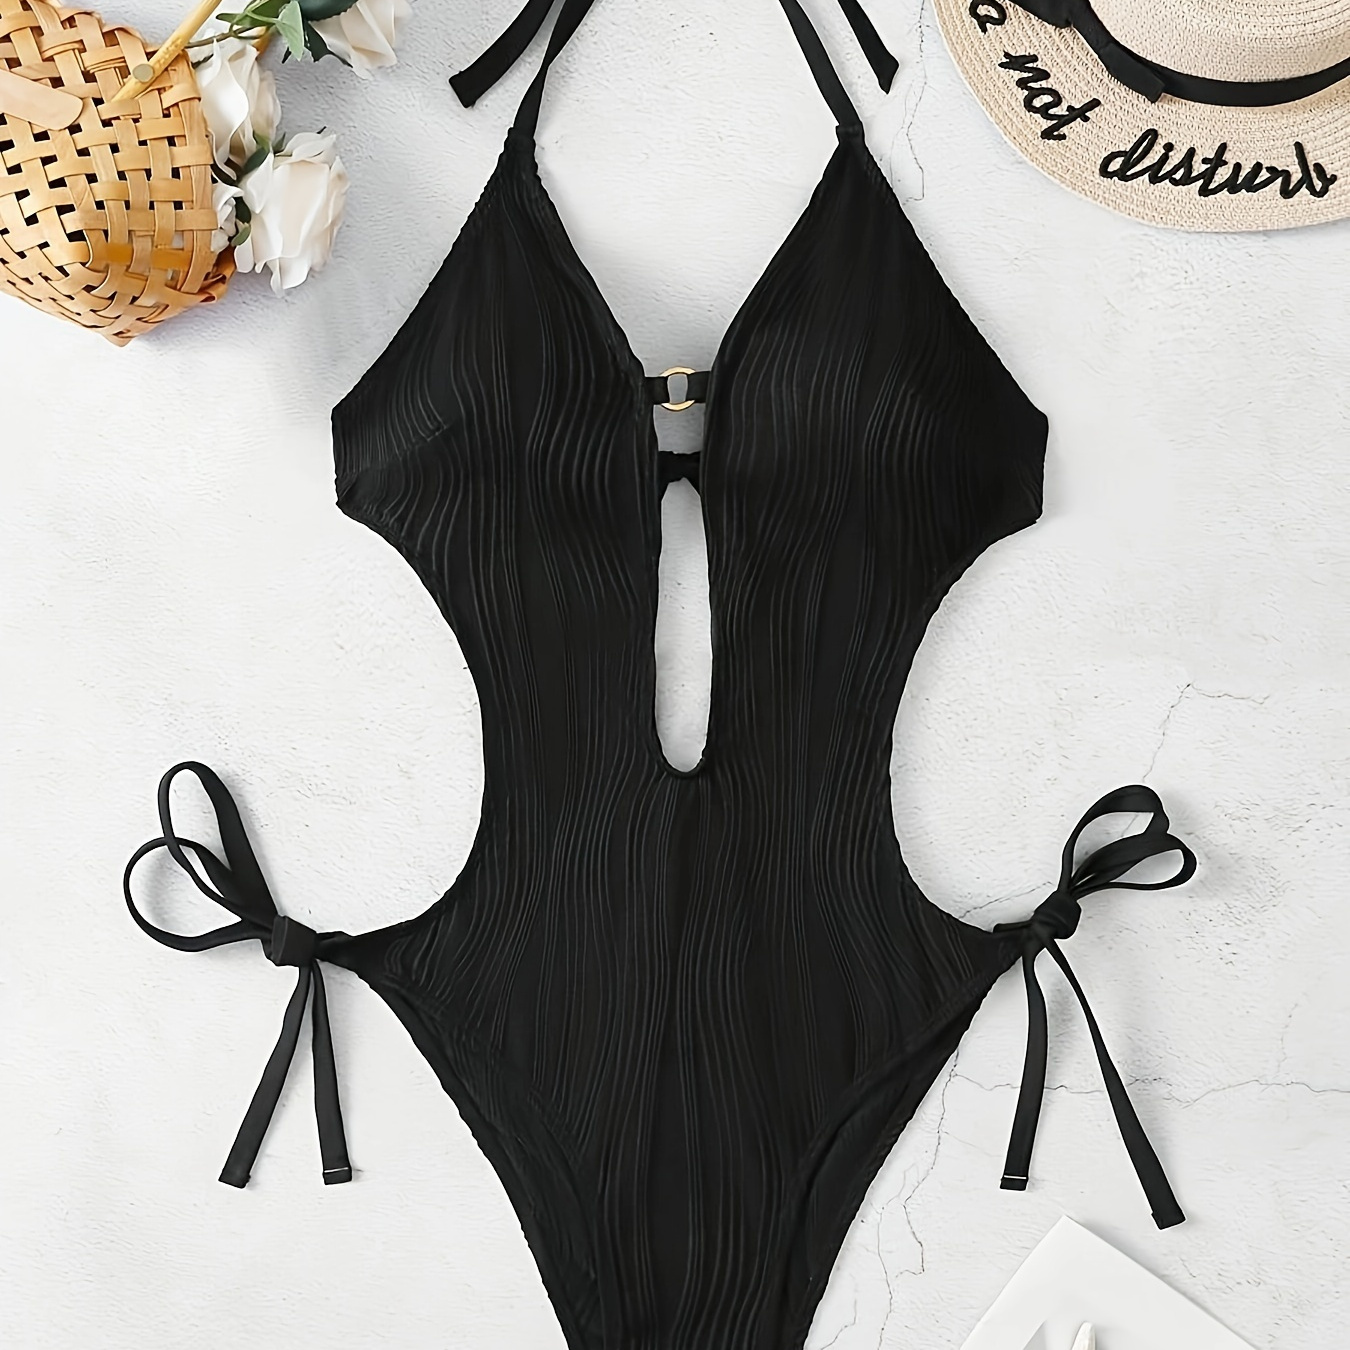 

1pc Elegant One-piece Swimsuit For Women, Sexy Cut-out Monokini With Tie-up Details, Beach Pool Swimwear, Black Ribbed Bathing Suit